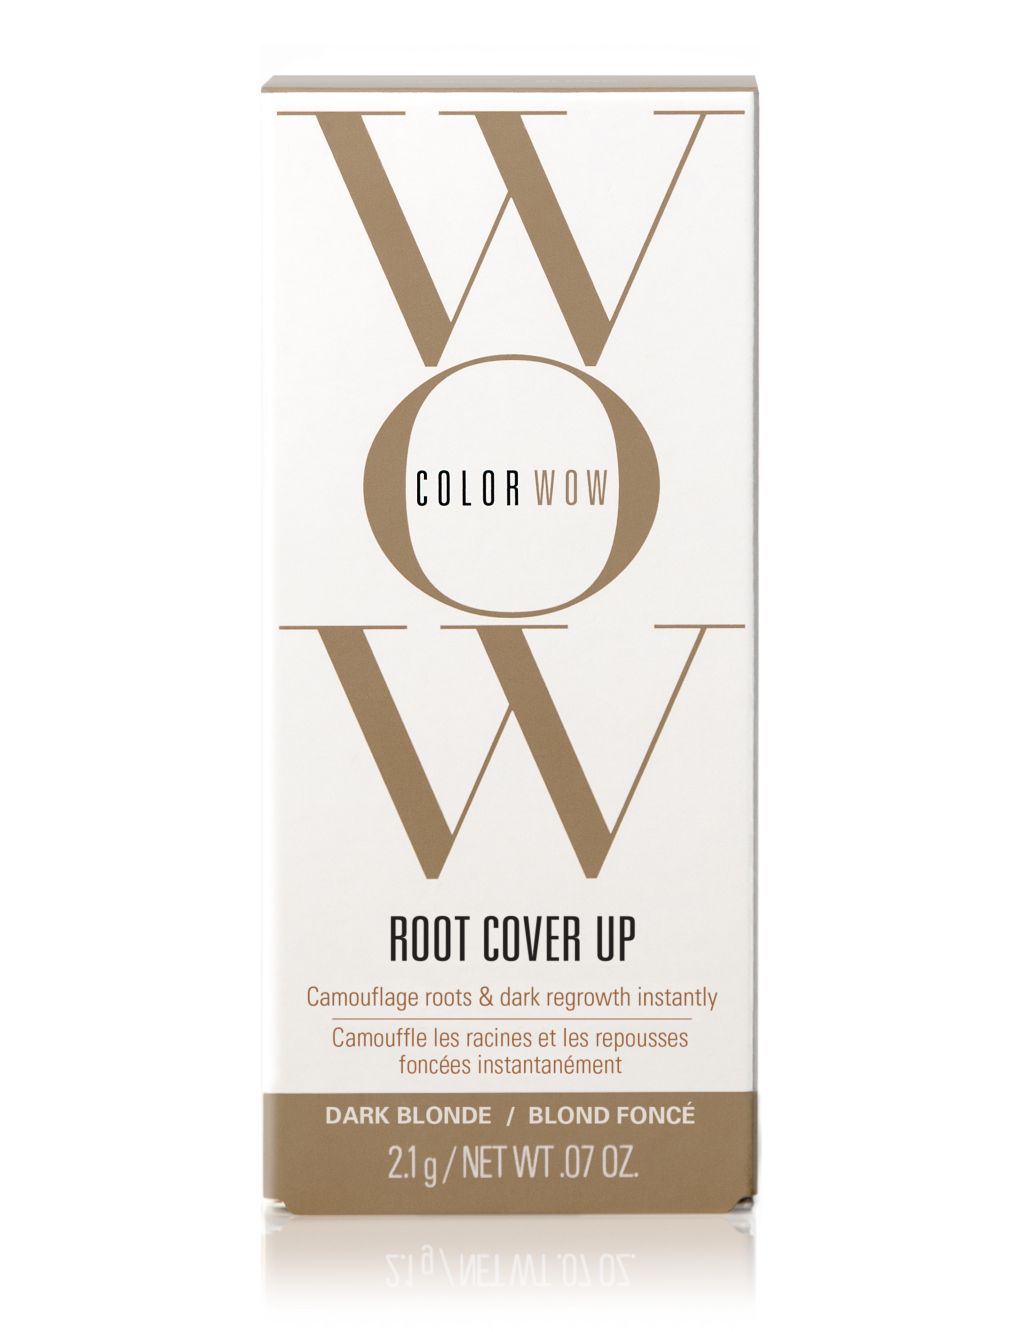 Root Cover Up For Dark Blonde Hair 2.1g 3 of 6